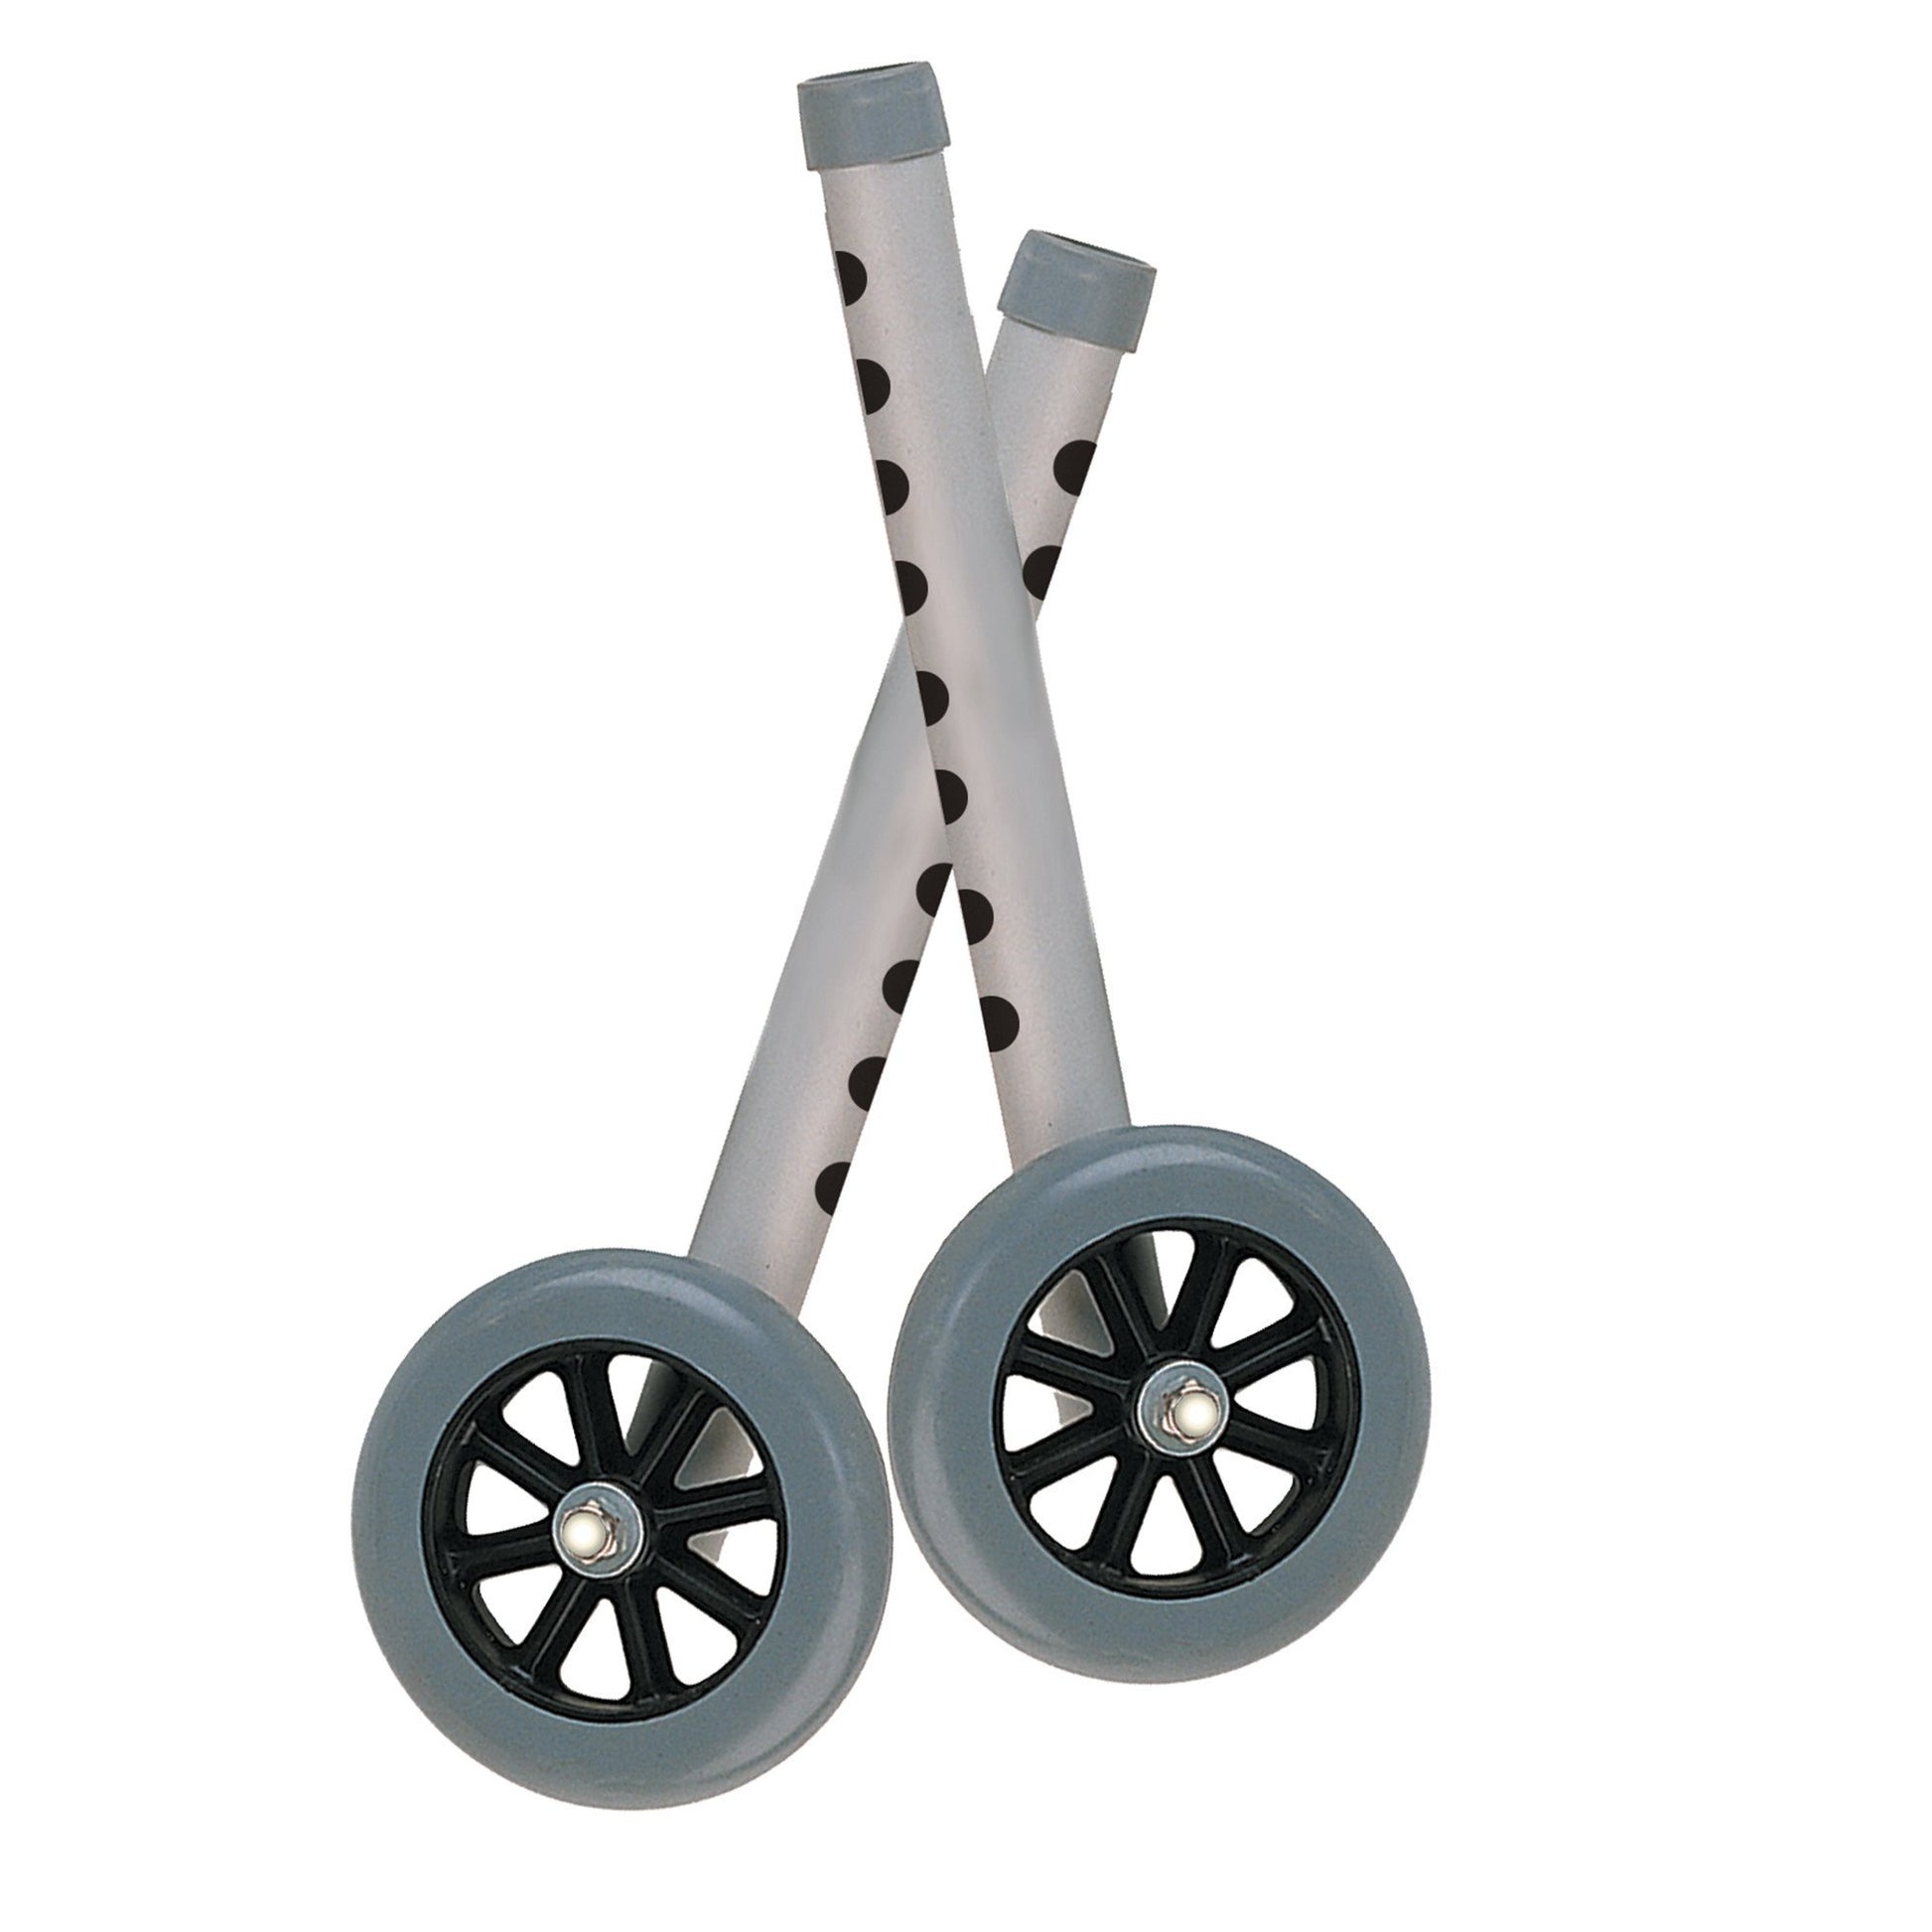 Extended Height 5" Walker Wheels and Legs Combo Pack